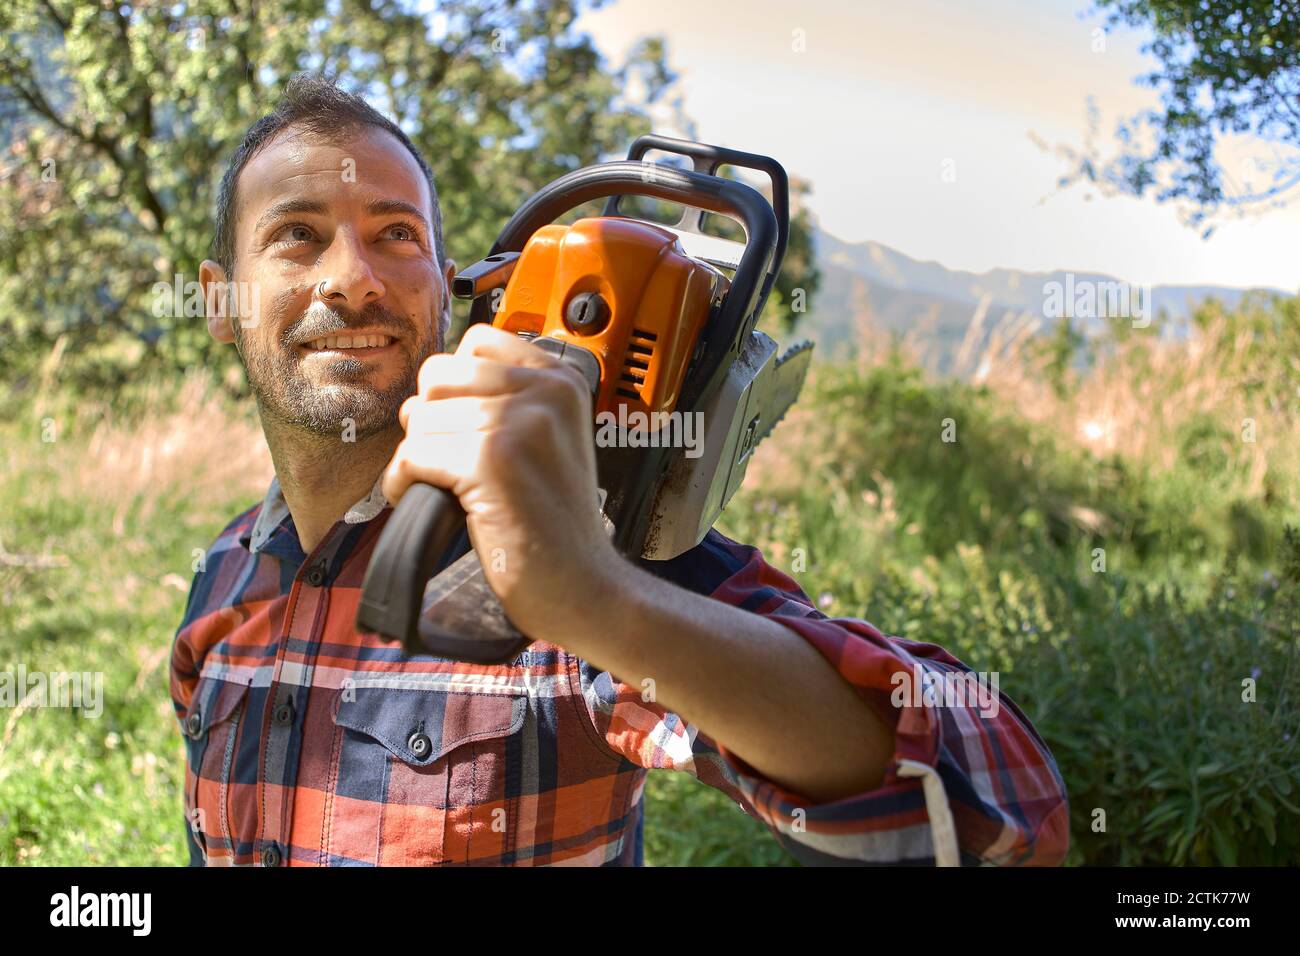 Smiling male lumberjack carrying electric saw on shoulder in forest Stock Photo